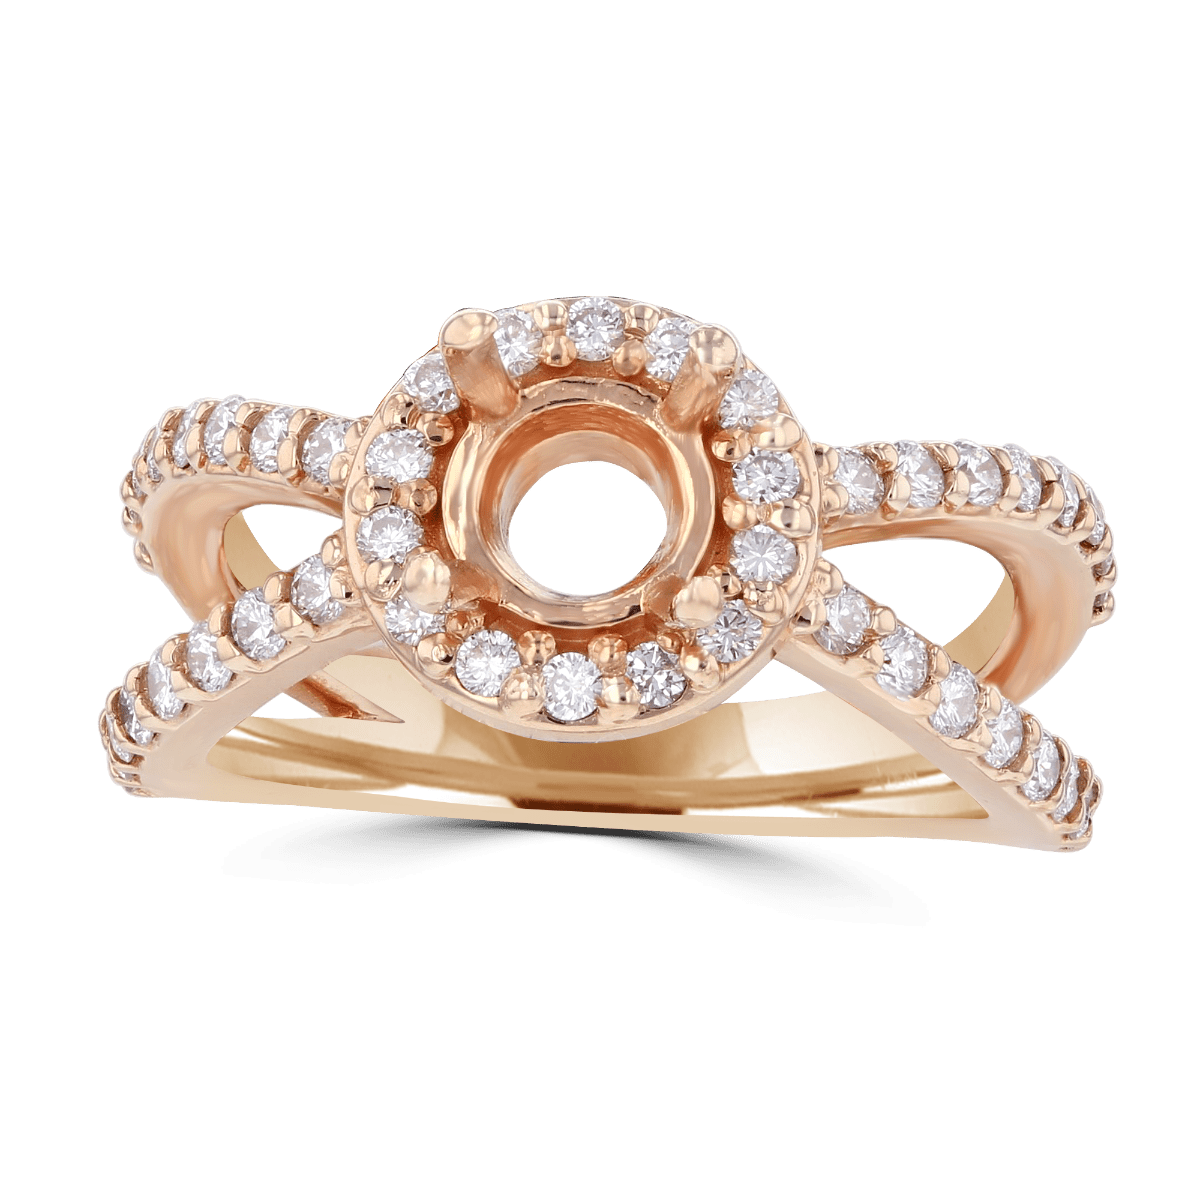 14KT Rose Gold .63 CTW Diamond Halo Mounting For 1.00-1.20 CT Round 4,4.5,5,5.5,6,6.5,7,7.5,8,8.5,9